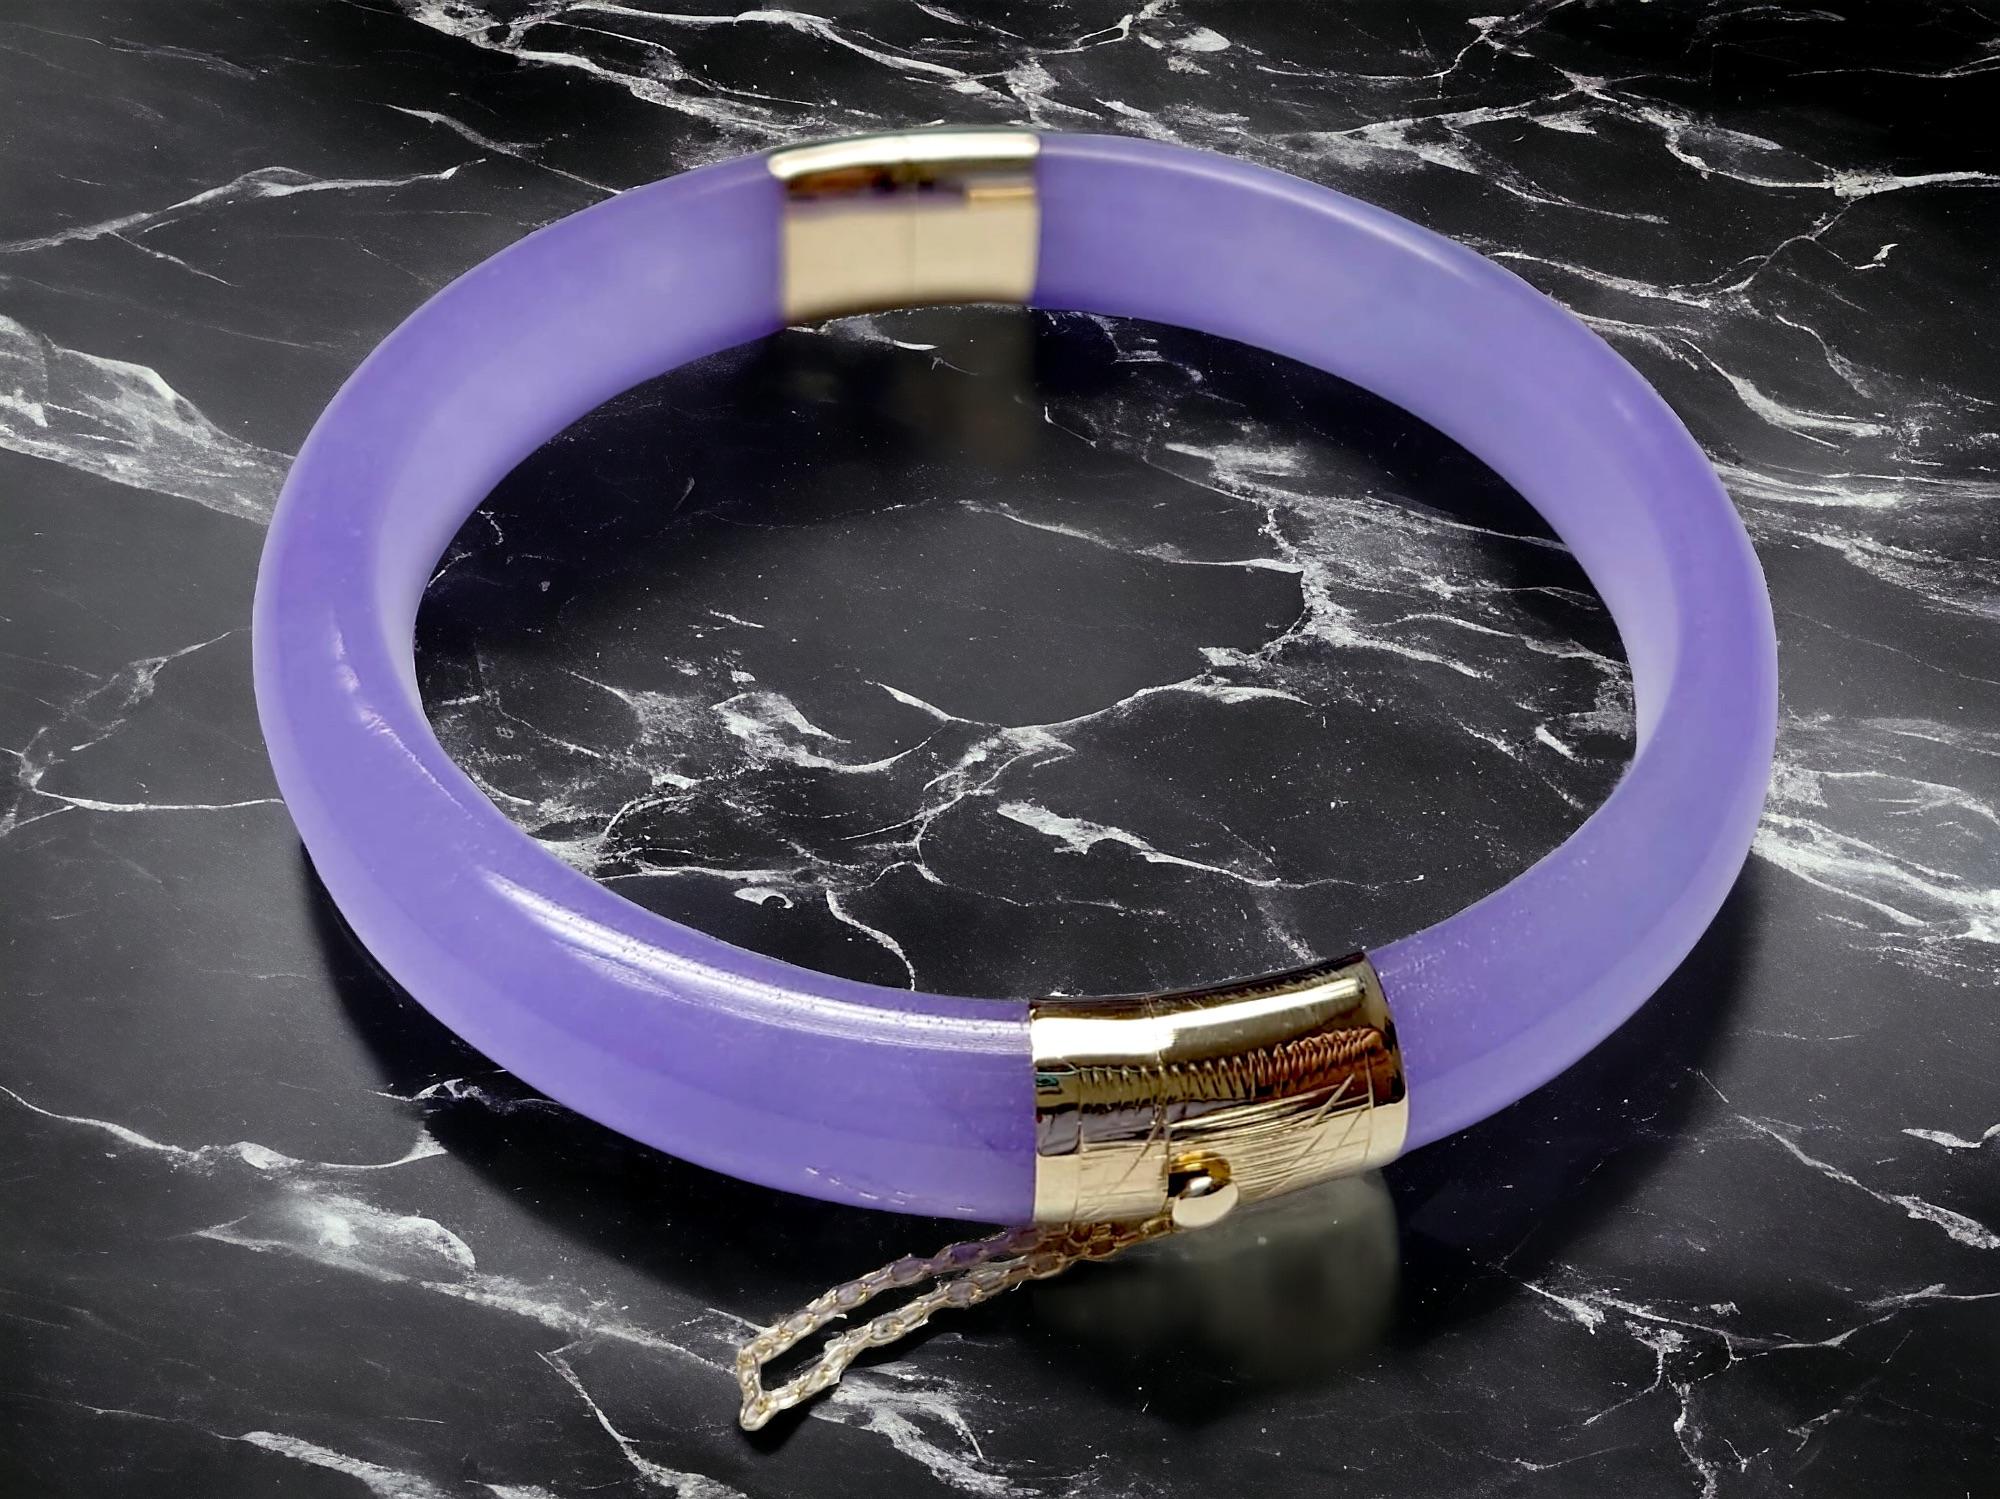 Viceroy's Circular Lavender Jade Bangle Bracelet (with 14K Yellow Gold) For Sale 8